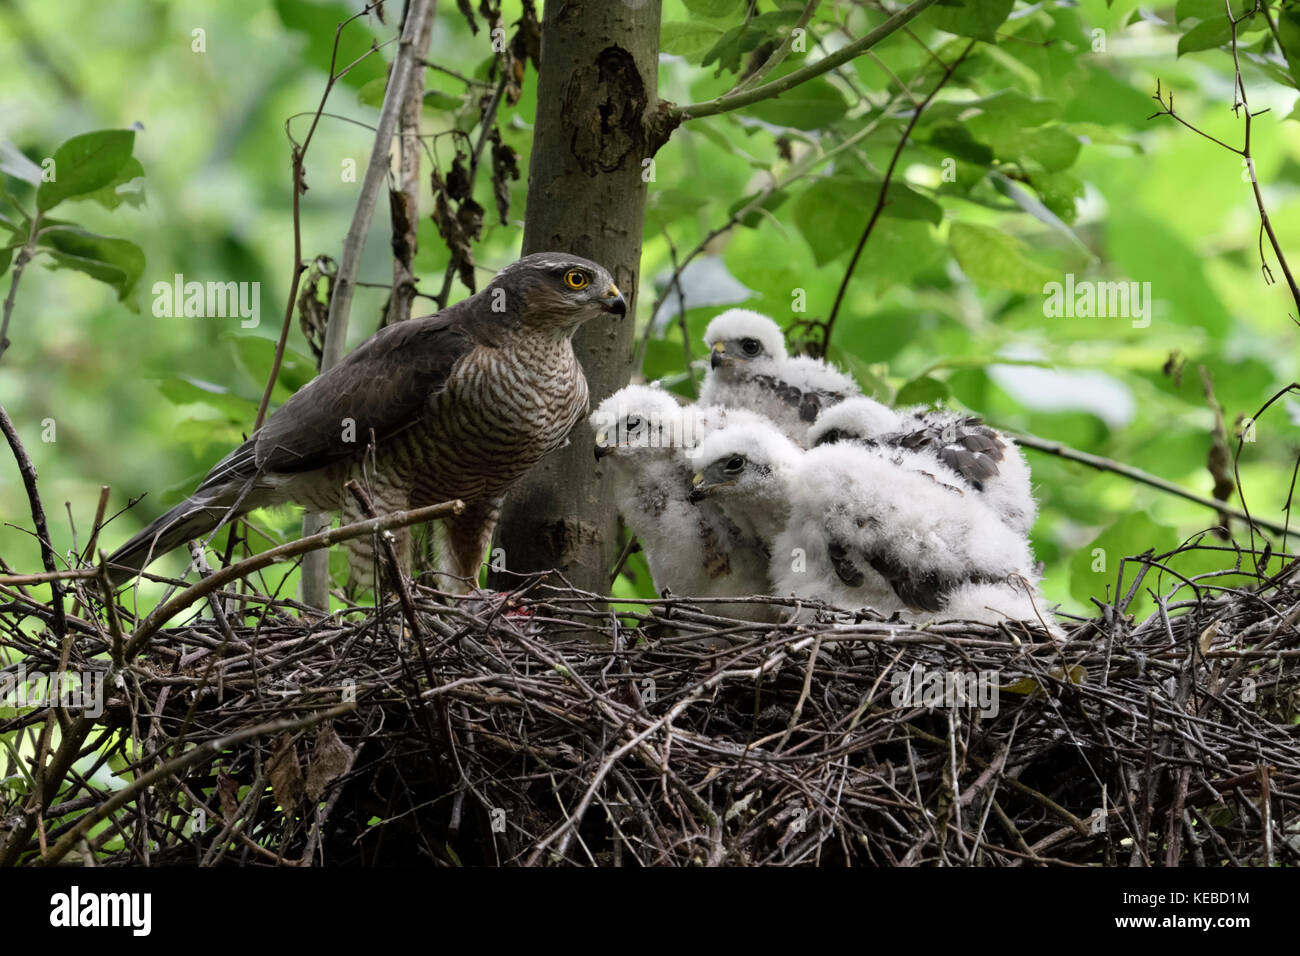 Sparrowhawk / Sperber ( Accipiter nisus ), adult female with grown up chicks, moulting adolescents in nest, cute and funny, wildlife, Europe. Stock Photo